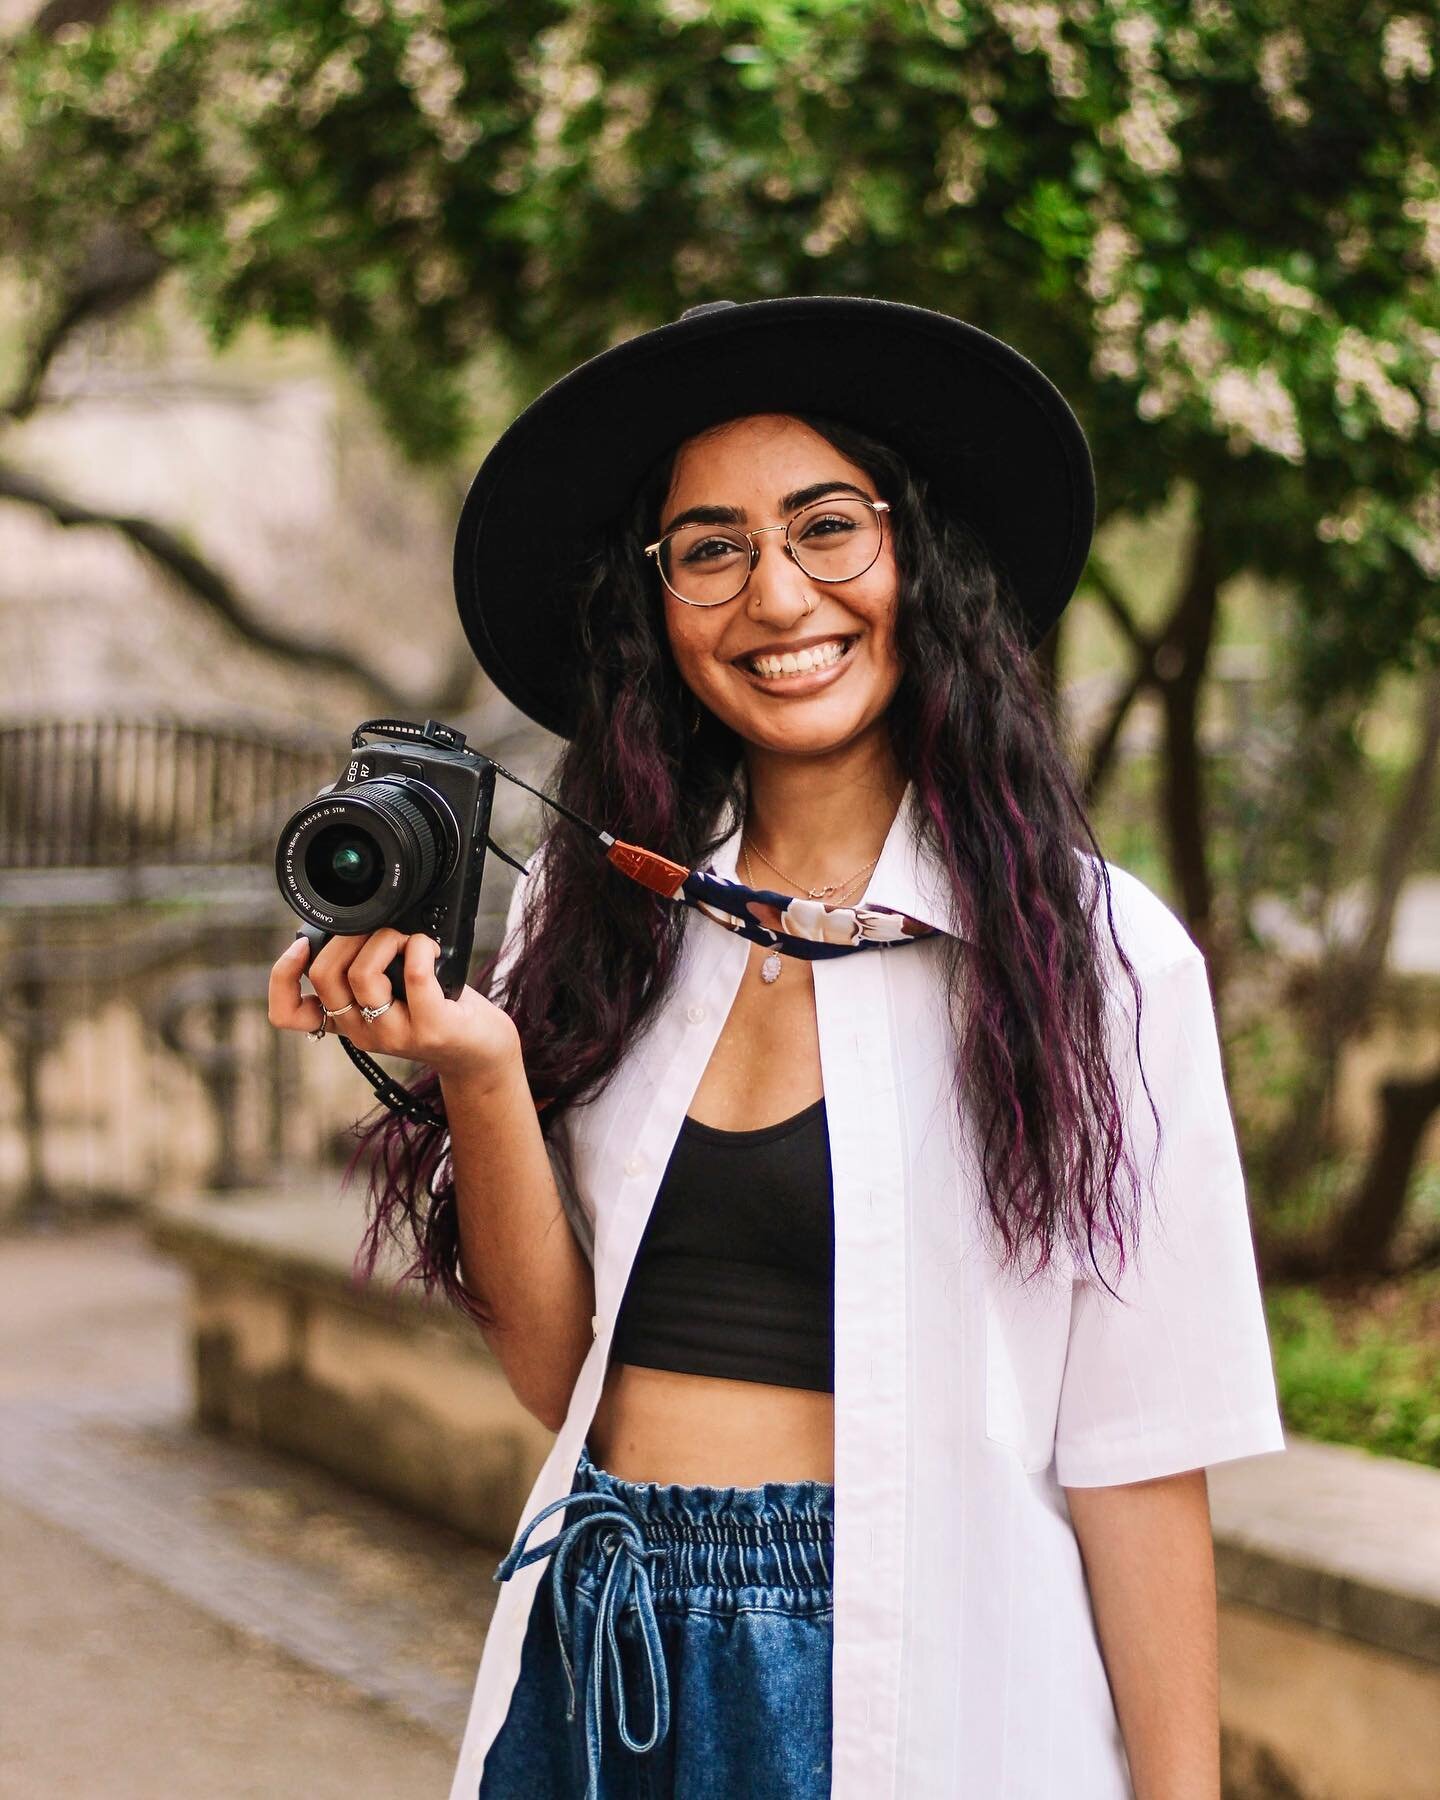 I&rsquo;ve grown so much in my work over the past year and feel it&rsquo;s time to reintroduce myself here. Hi 👋🏽 I&rsquo;m shreya! 

⭐️I&rsquo;m 20 years old but learnt how to first use a camera when I was 14 🥳
⭐️A proud advertising major (I woul